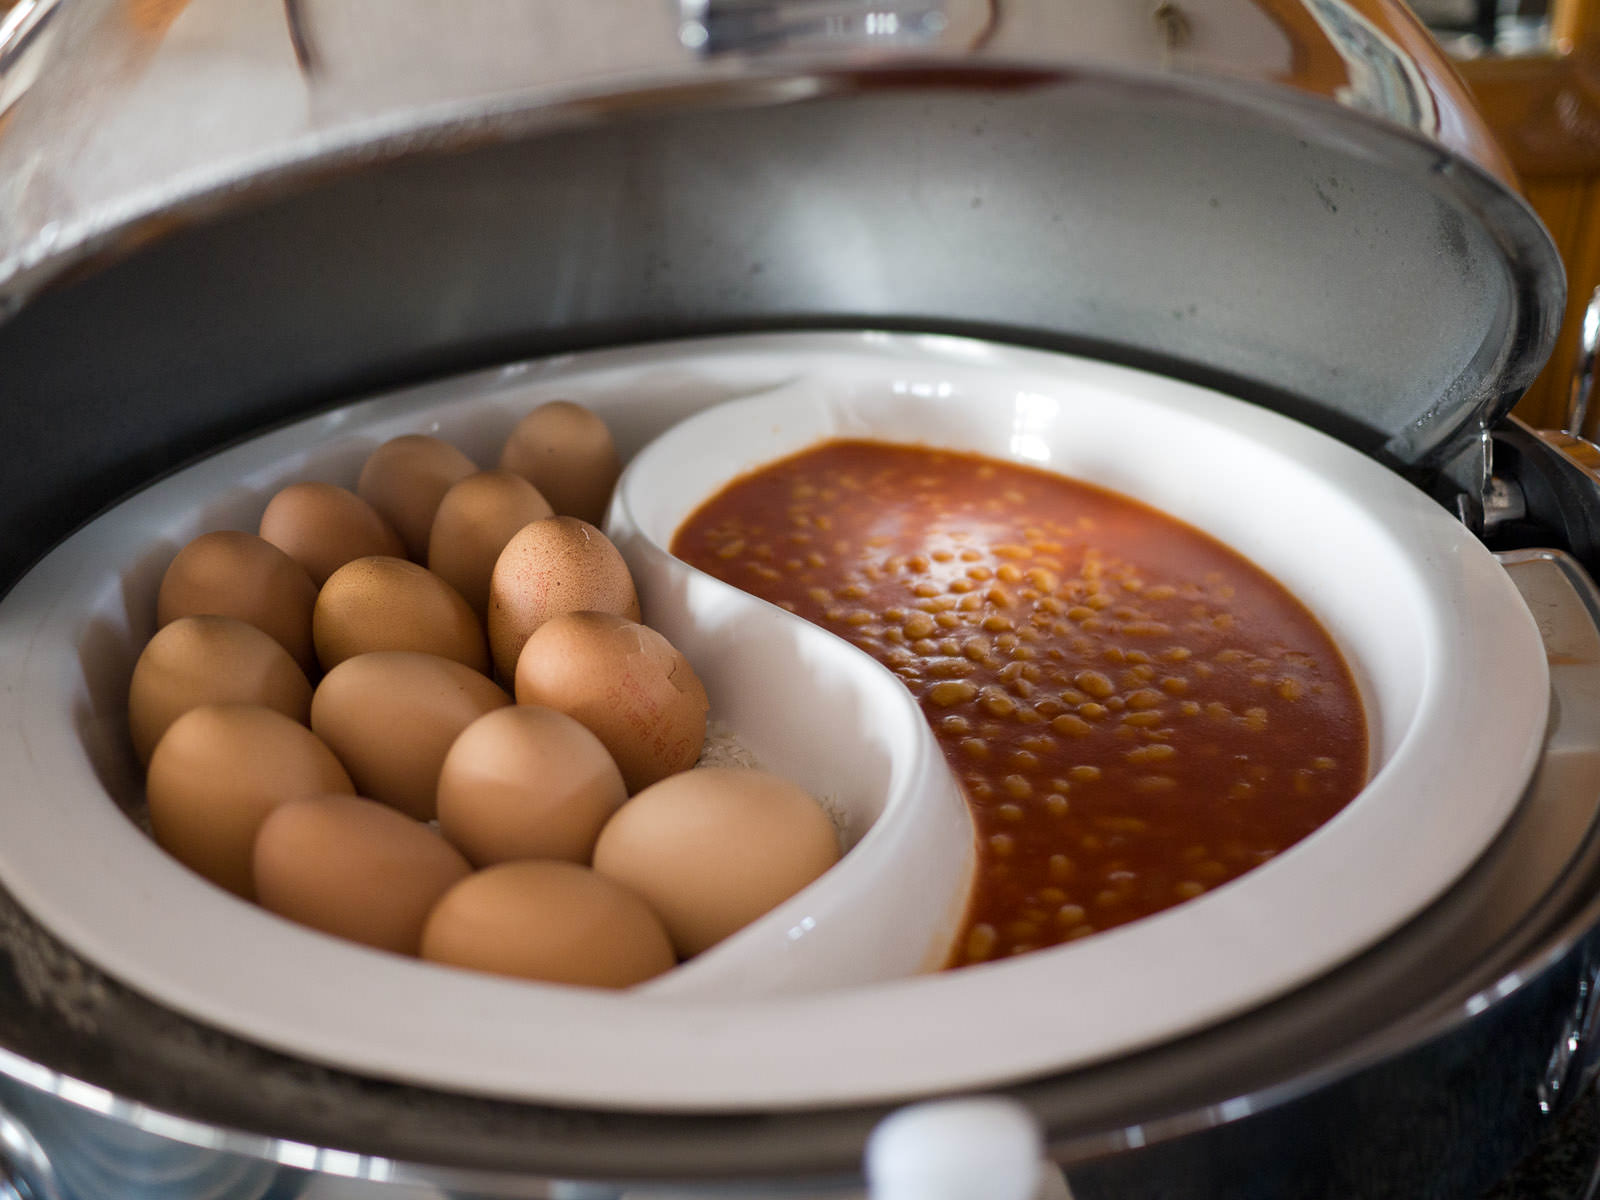 Boiled eggs and baked beans